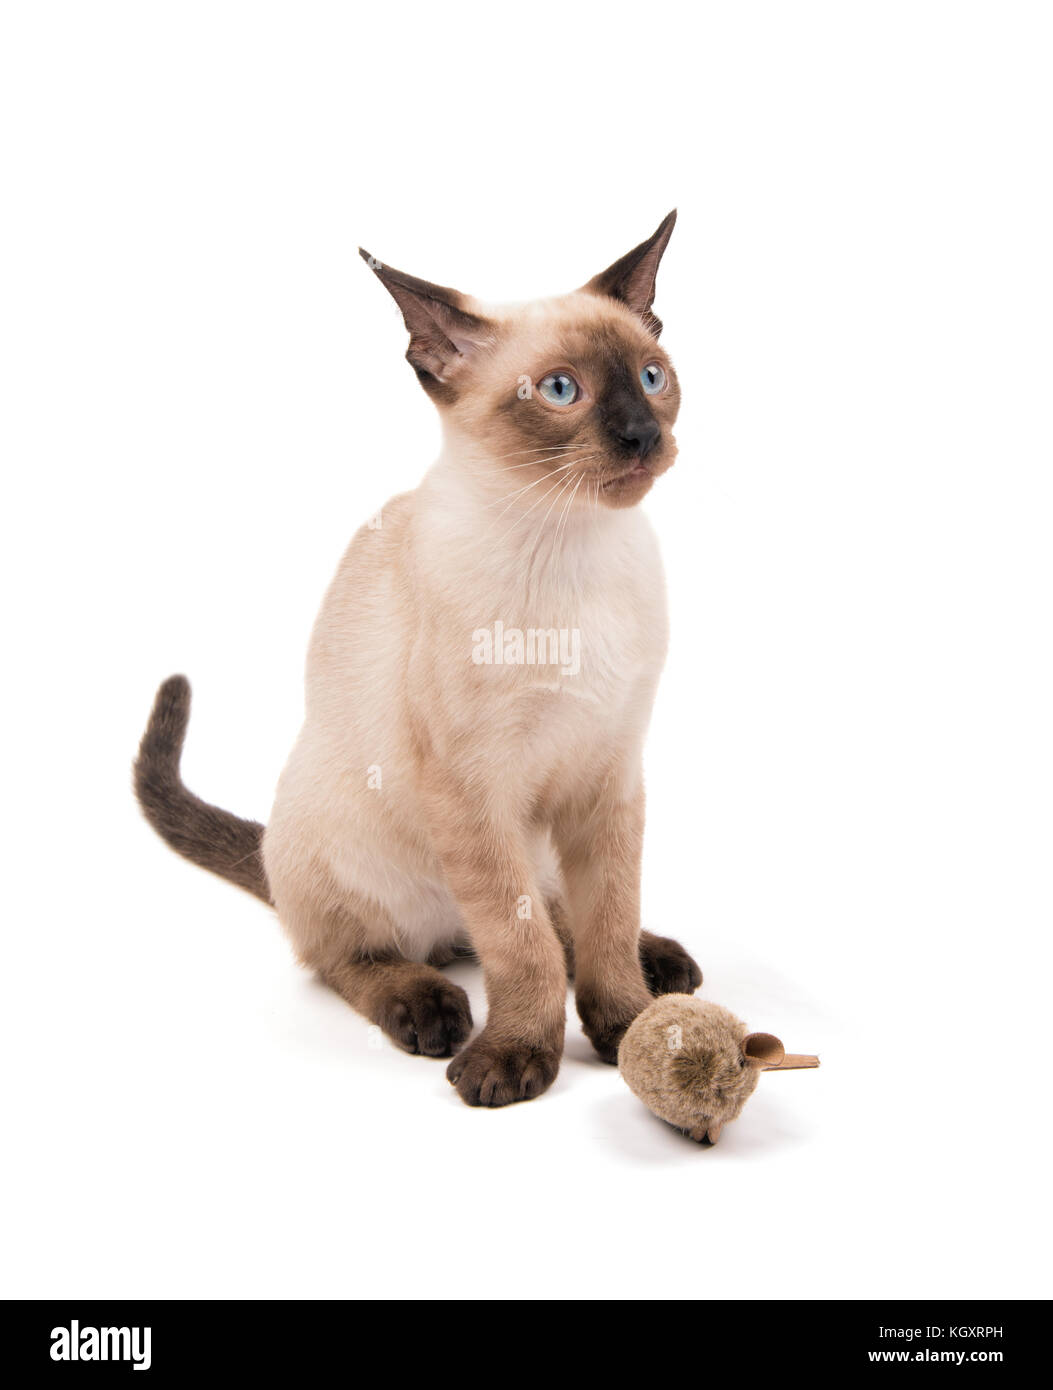 Young Siamese cat sitting with a toy looking up, on white Stock Photo